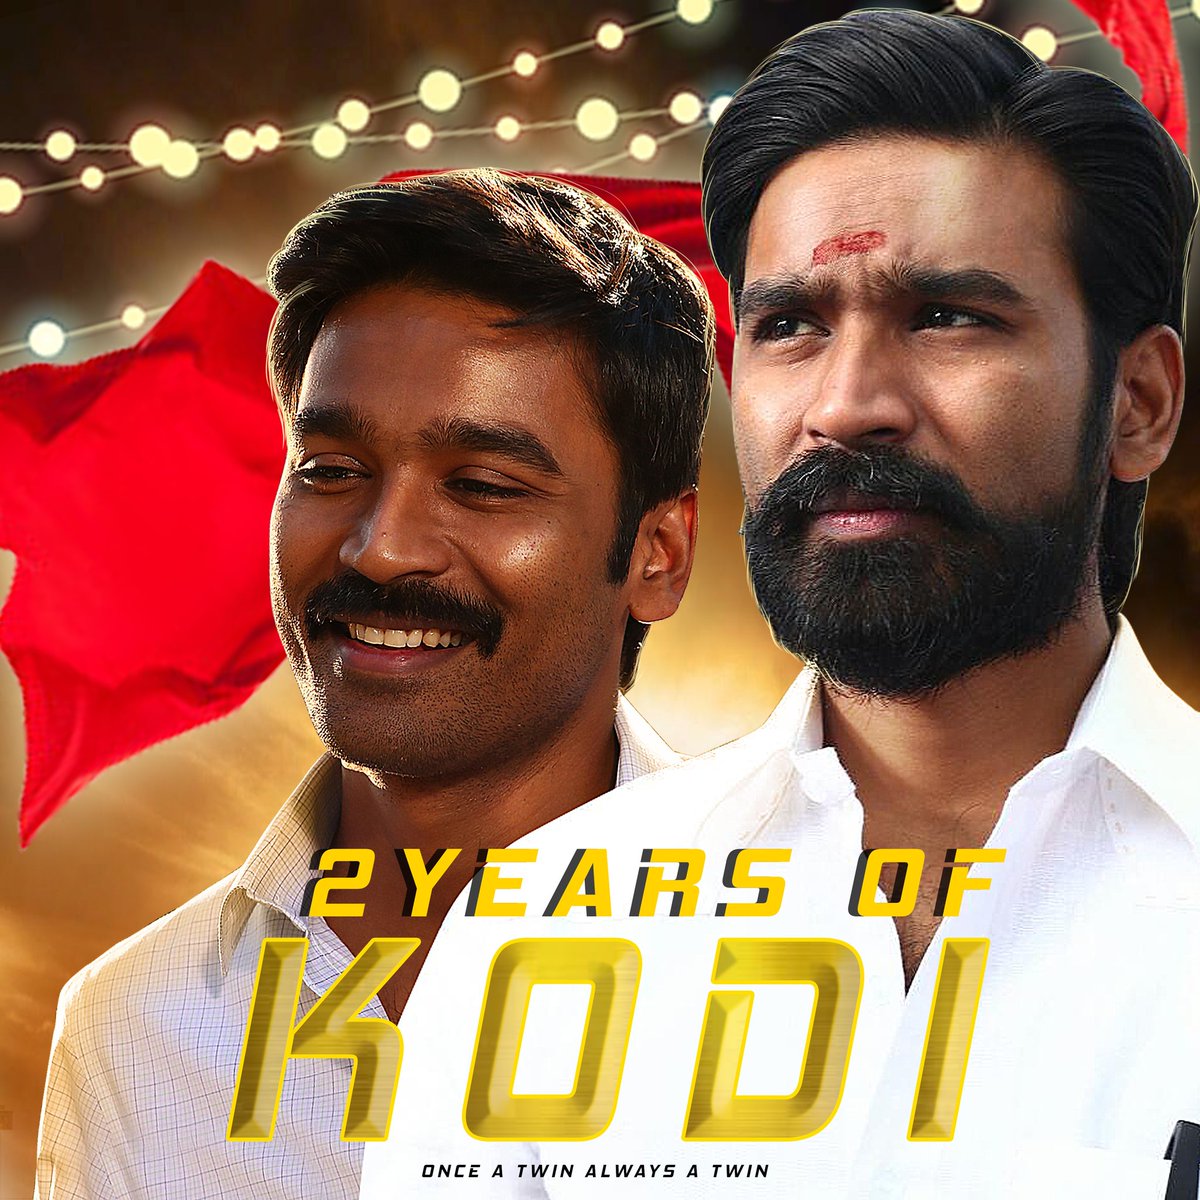 #Kodi movie completes 2years. A well scripted political thriller with @dhanushkraja sir playing dual role for the first time. #2YearsOfBlockbusterKODI  

#Dhanush #DuraiSenthilKumar 
#DnD can't Wait For This Combo back!!!  @durairsk Congrats sir.

@Madan2791 @EscapeArtists_